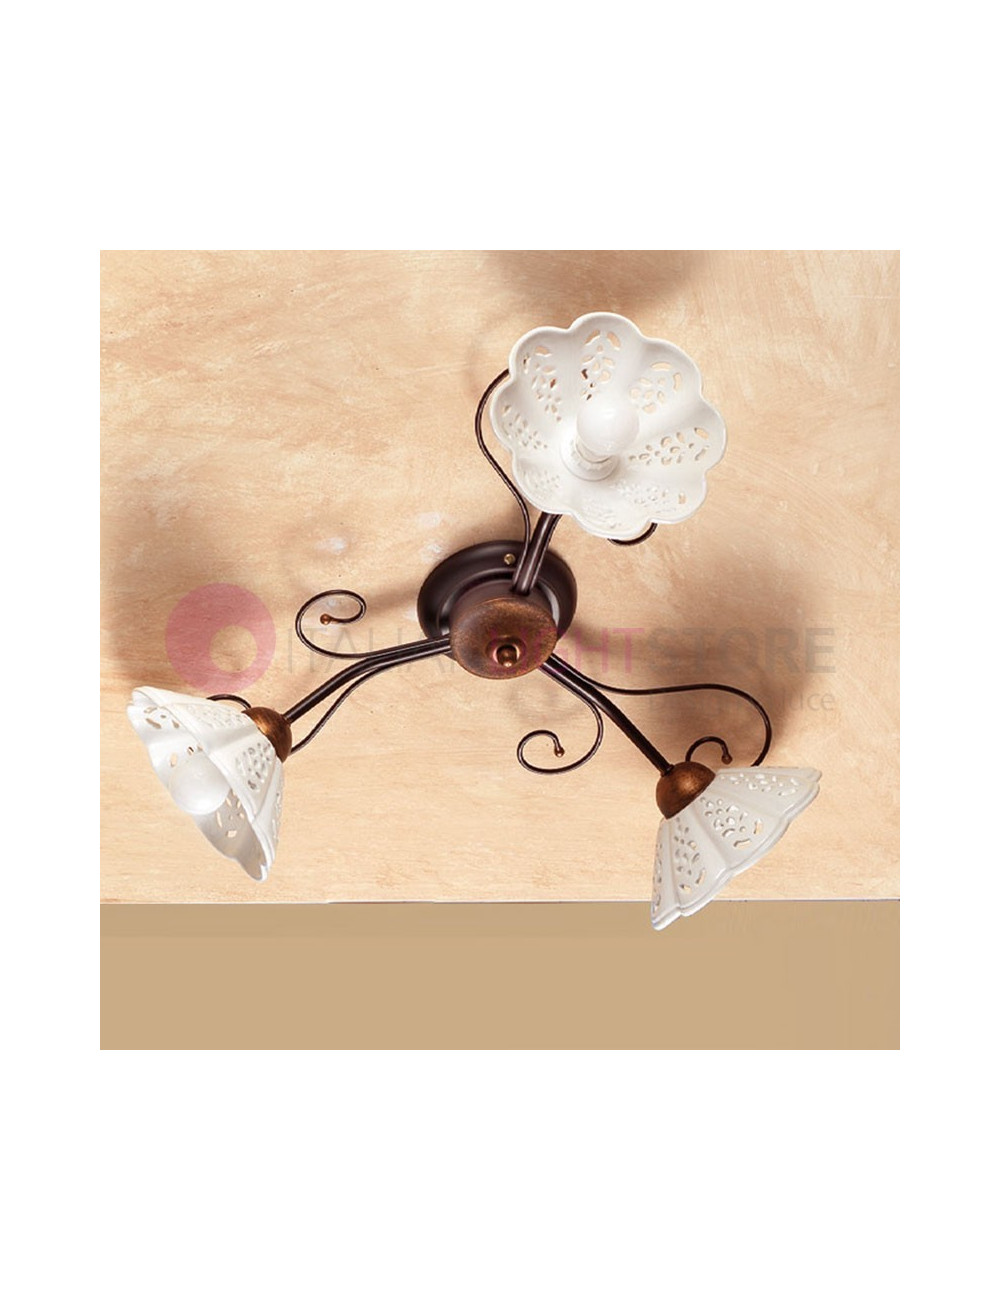 CALCINAIA Ceiling light with 3 Lights in Ceramic and Wrought Iron Rustic Country - Ceramiche Borso